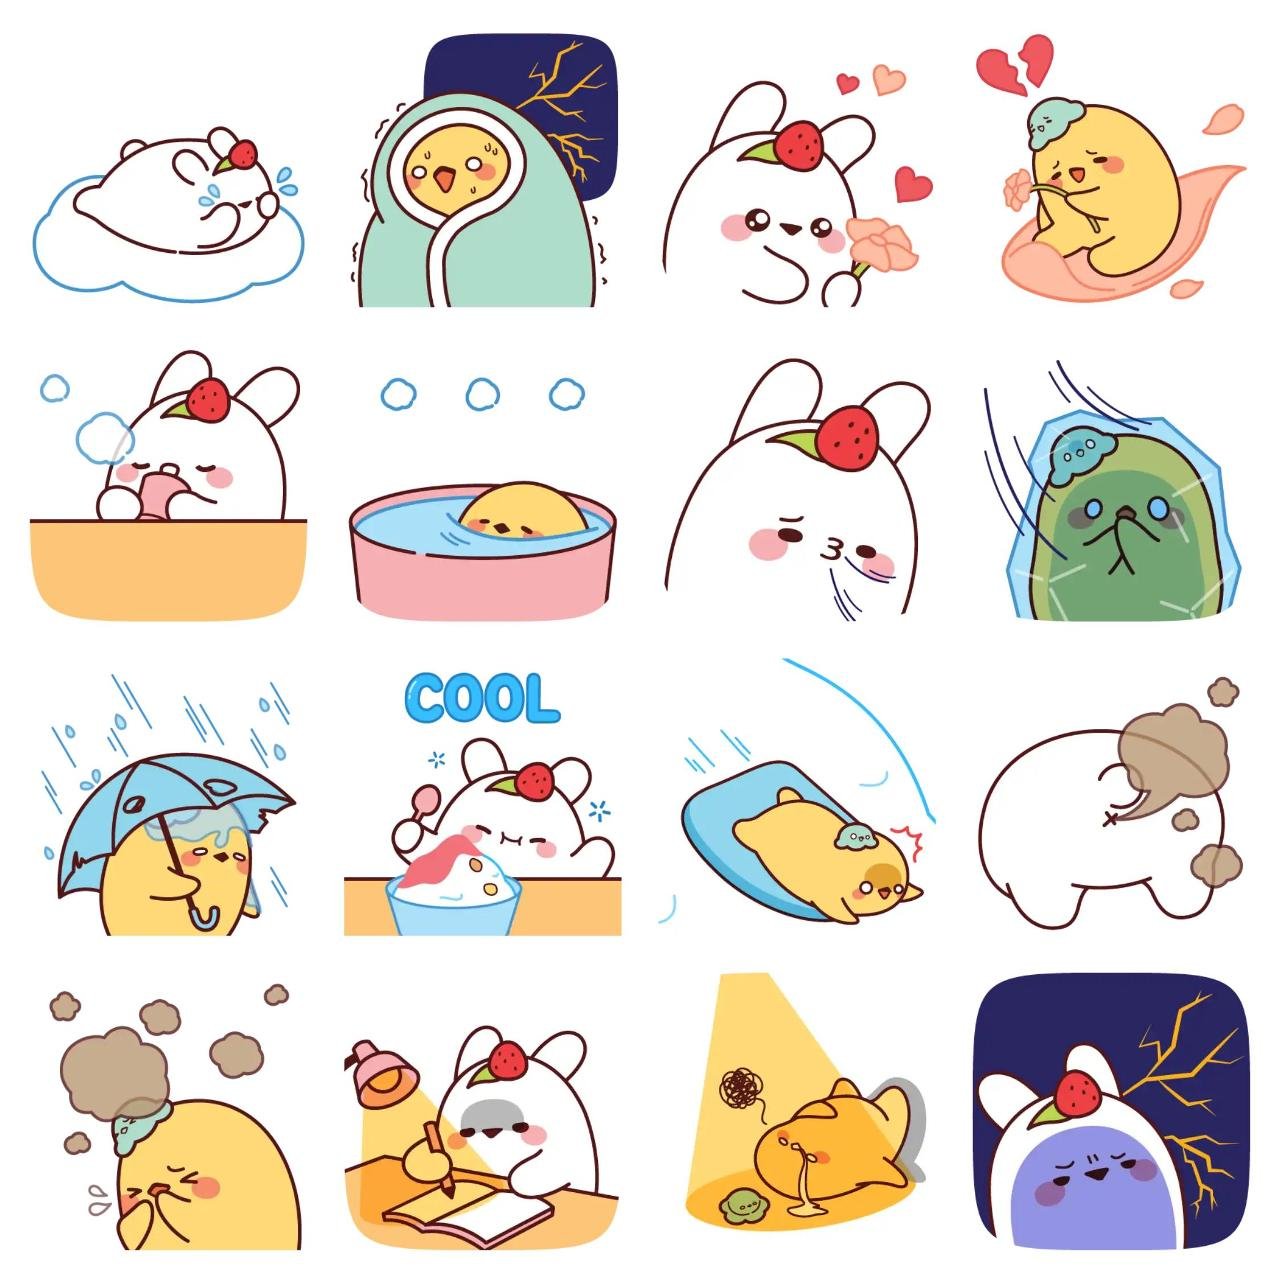 Rabbitcone and Cup duck Animation/Cartoon,Animals sticker pack for Whatsapp, Telegram, Signal, and others chatting and message apps